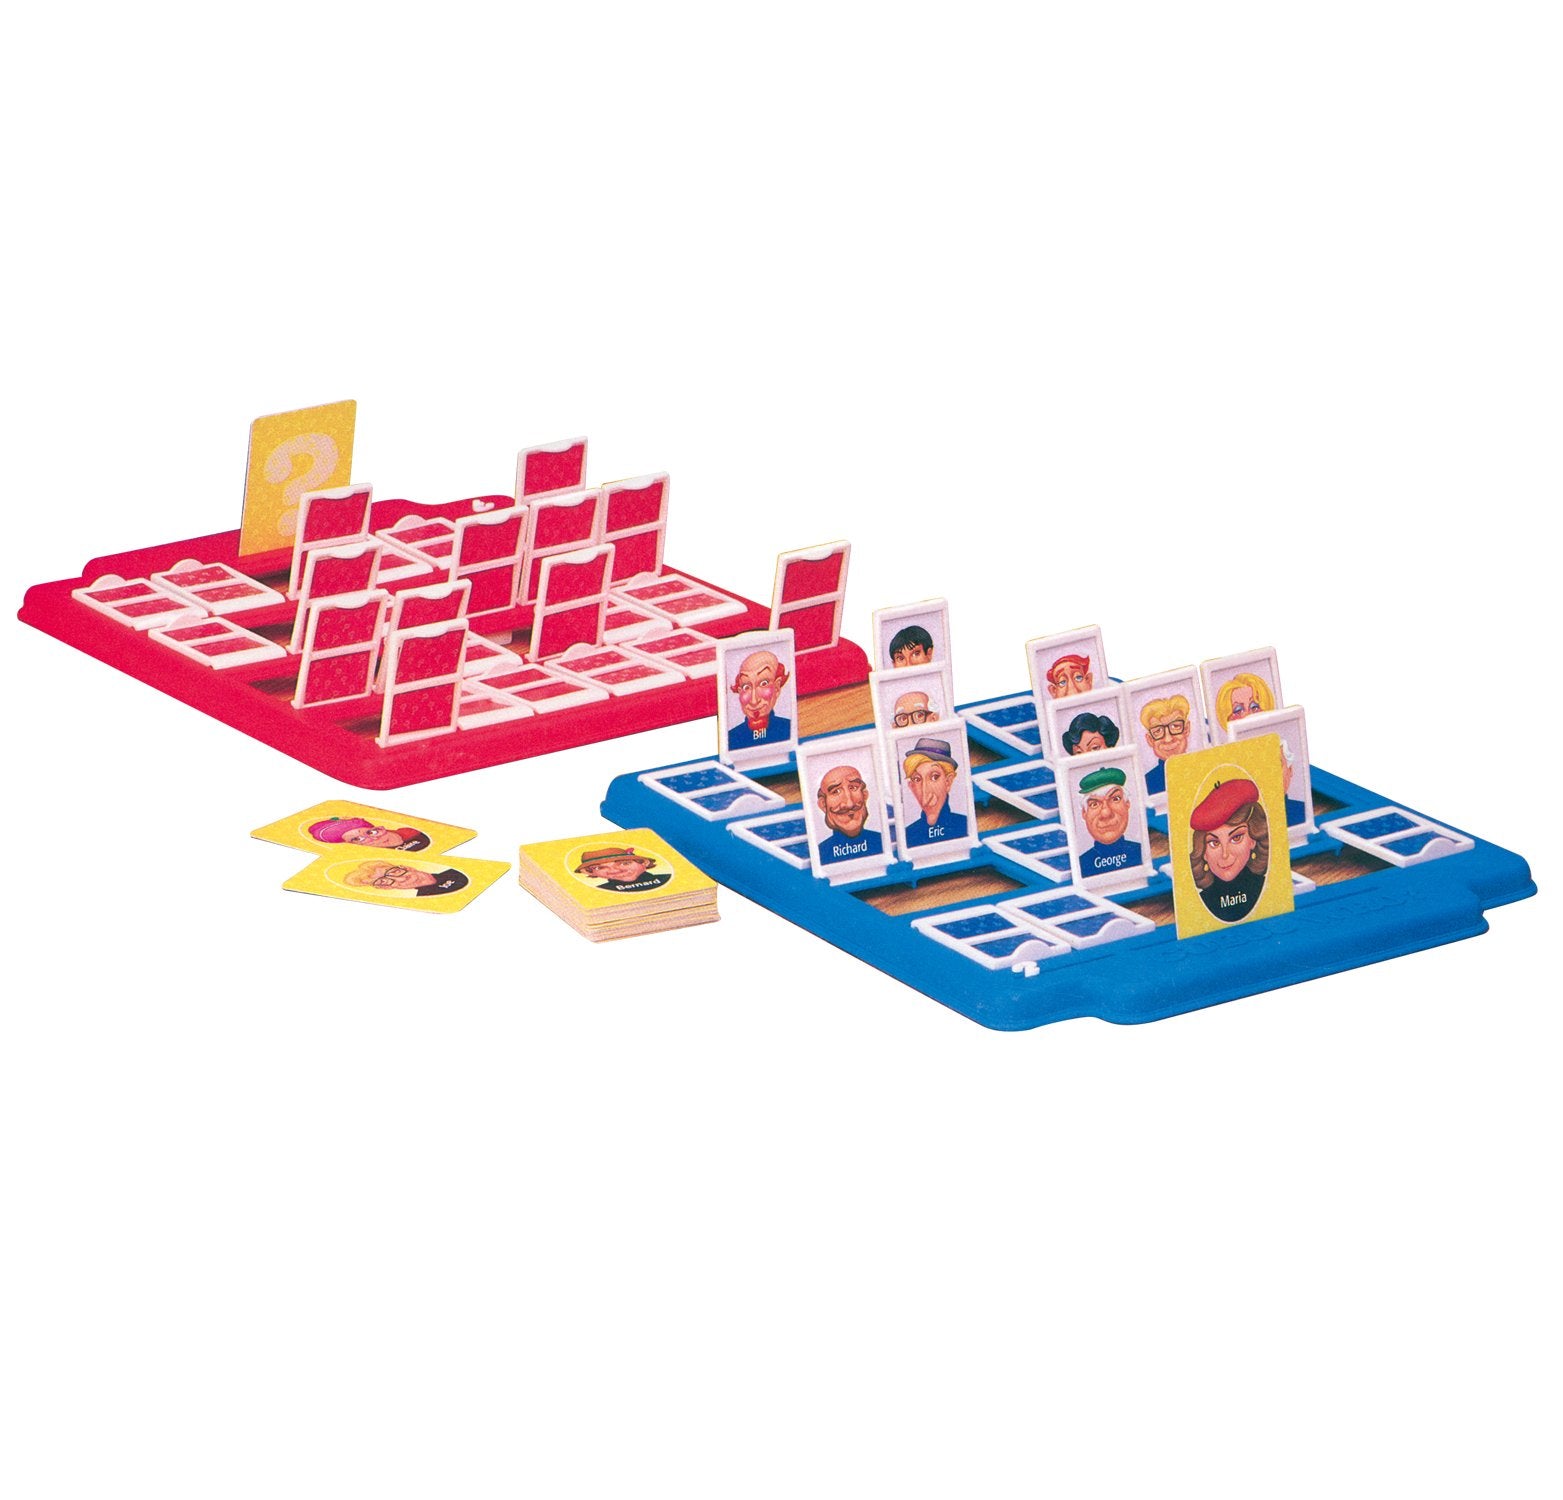 Winning Moves Games Guess Who? Board Game, Multicolor (1191)